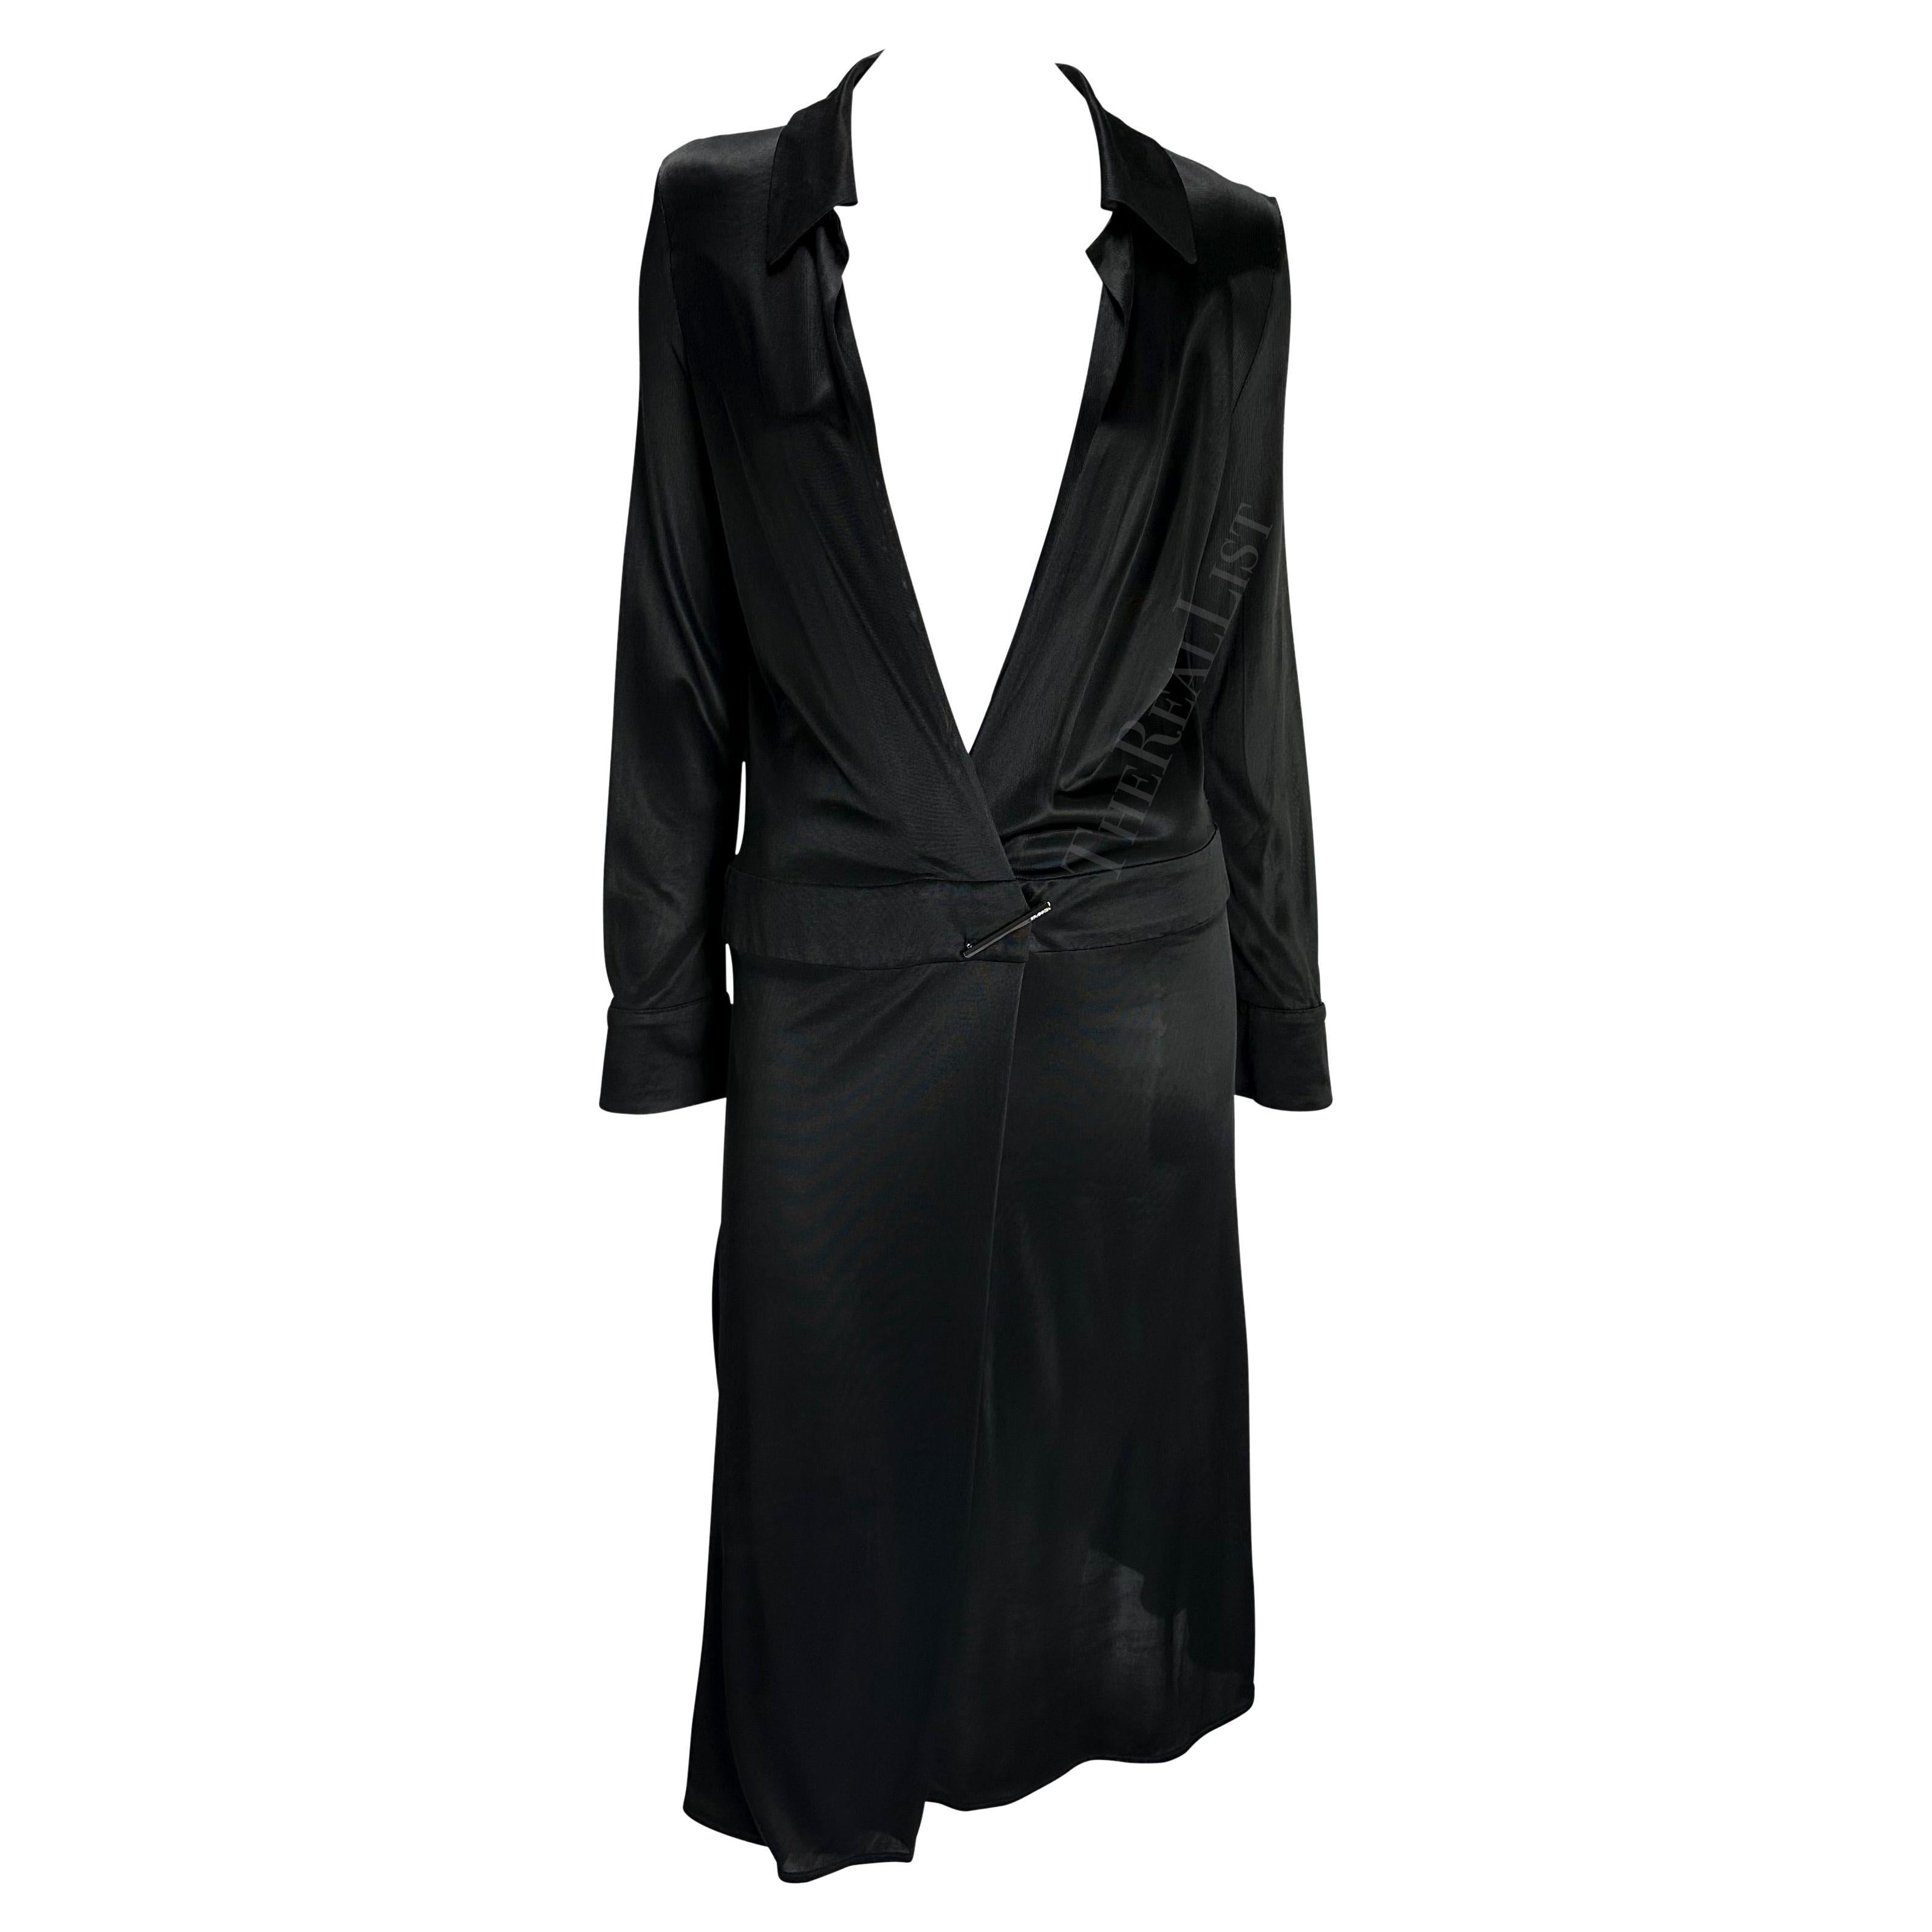 S/S 2000 Gucci by Tom Ford Runway Plunging Neckline Black Viscose Runway Dress For Sale